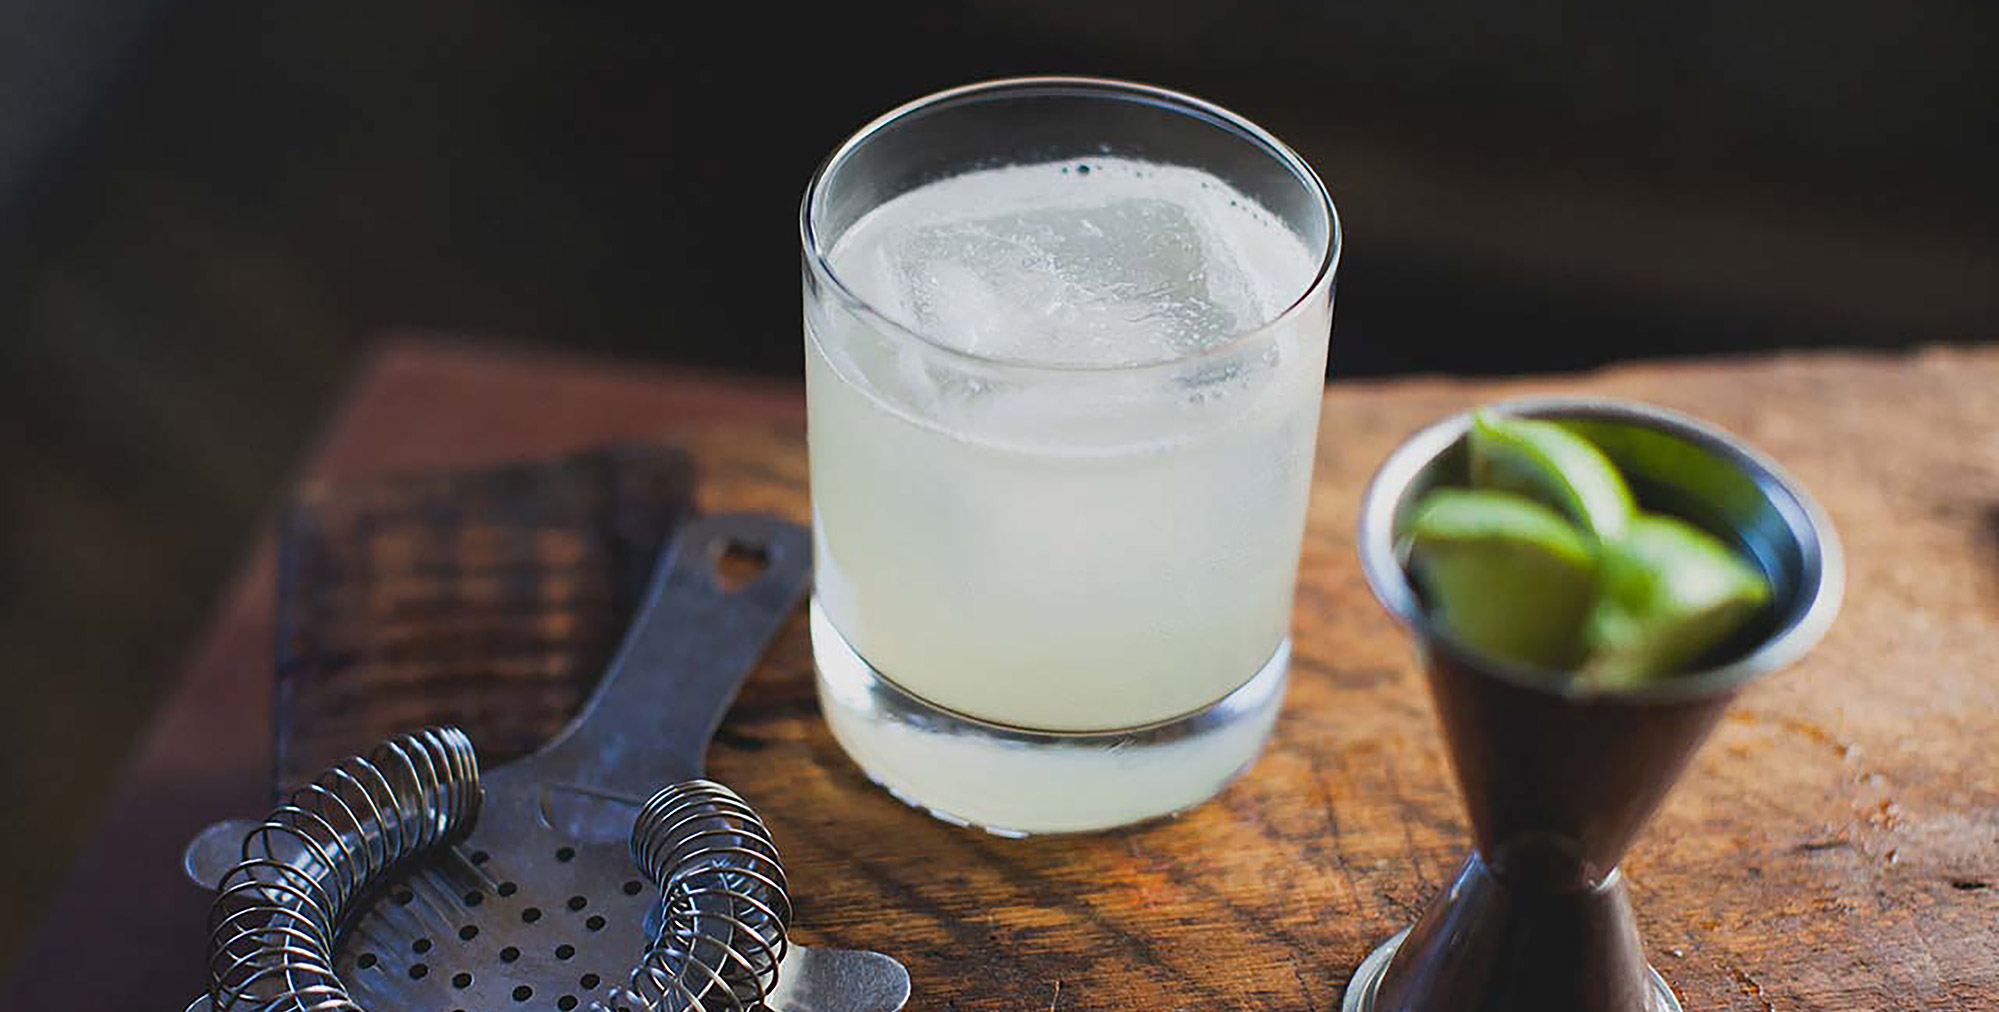 Blanco Margarita drink made with Don Julio Blanco Tequila